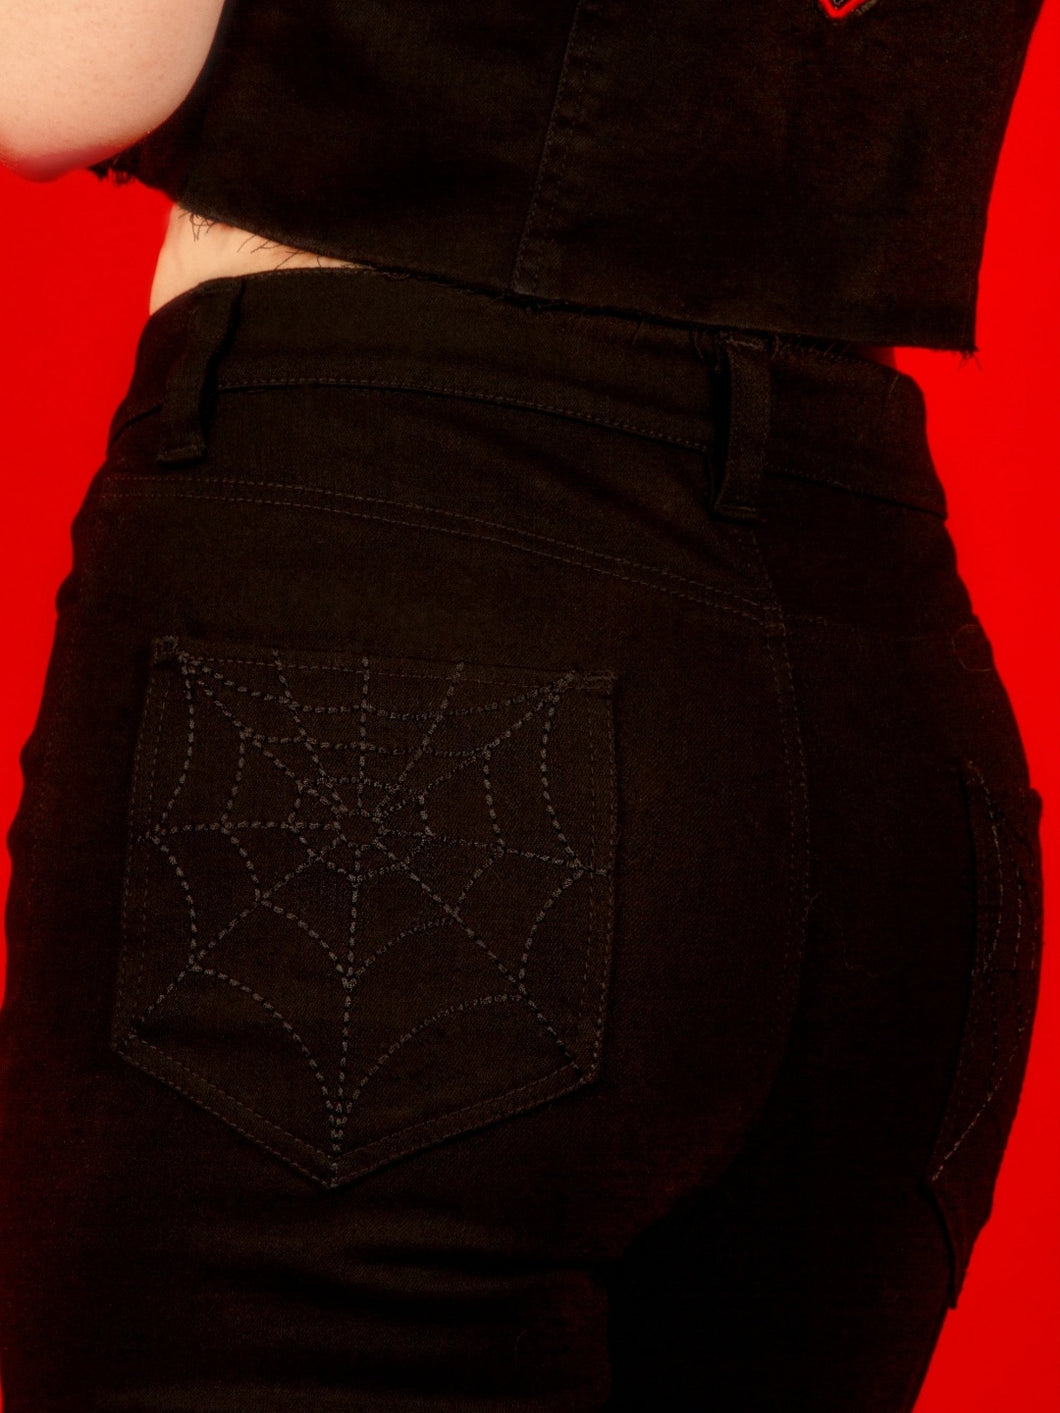 Charlotte or Black Widow jeans by Katacomb